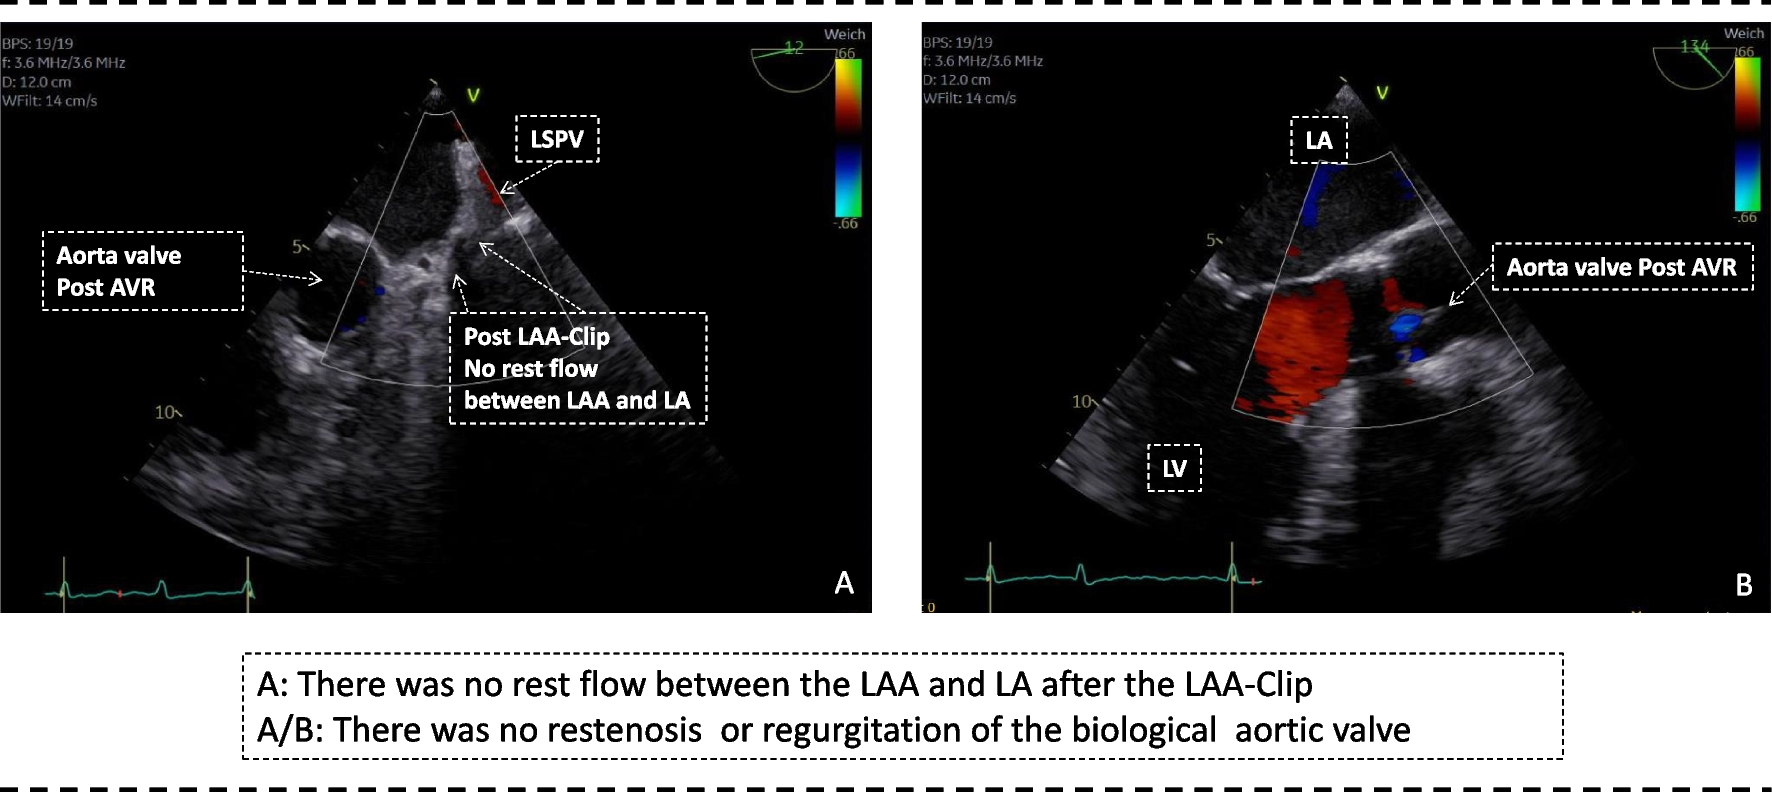 Pulsed field ablation for atrial fibrillation when in proximity to LAA AtriClip: the LAA-Clip does not inhibit the pulse